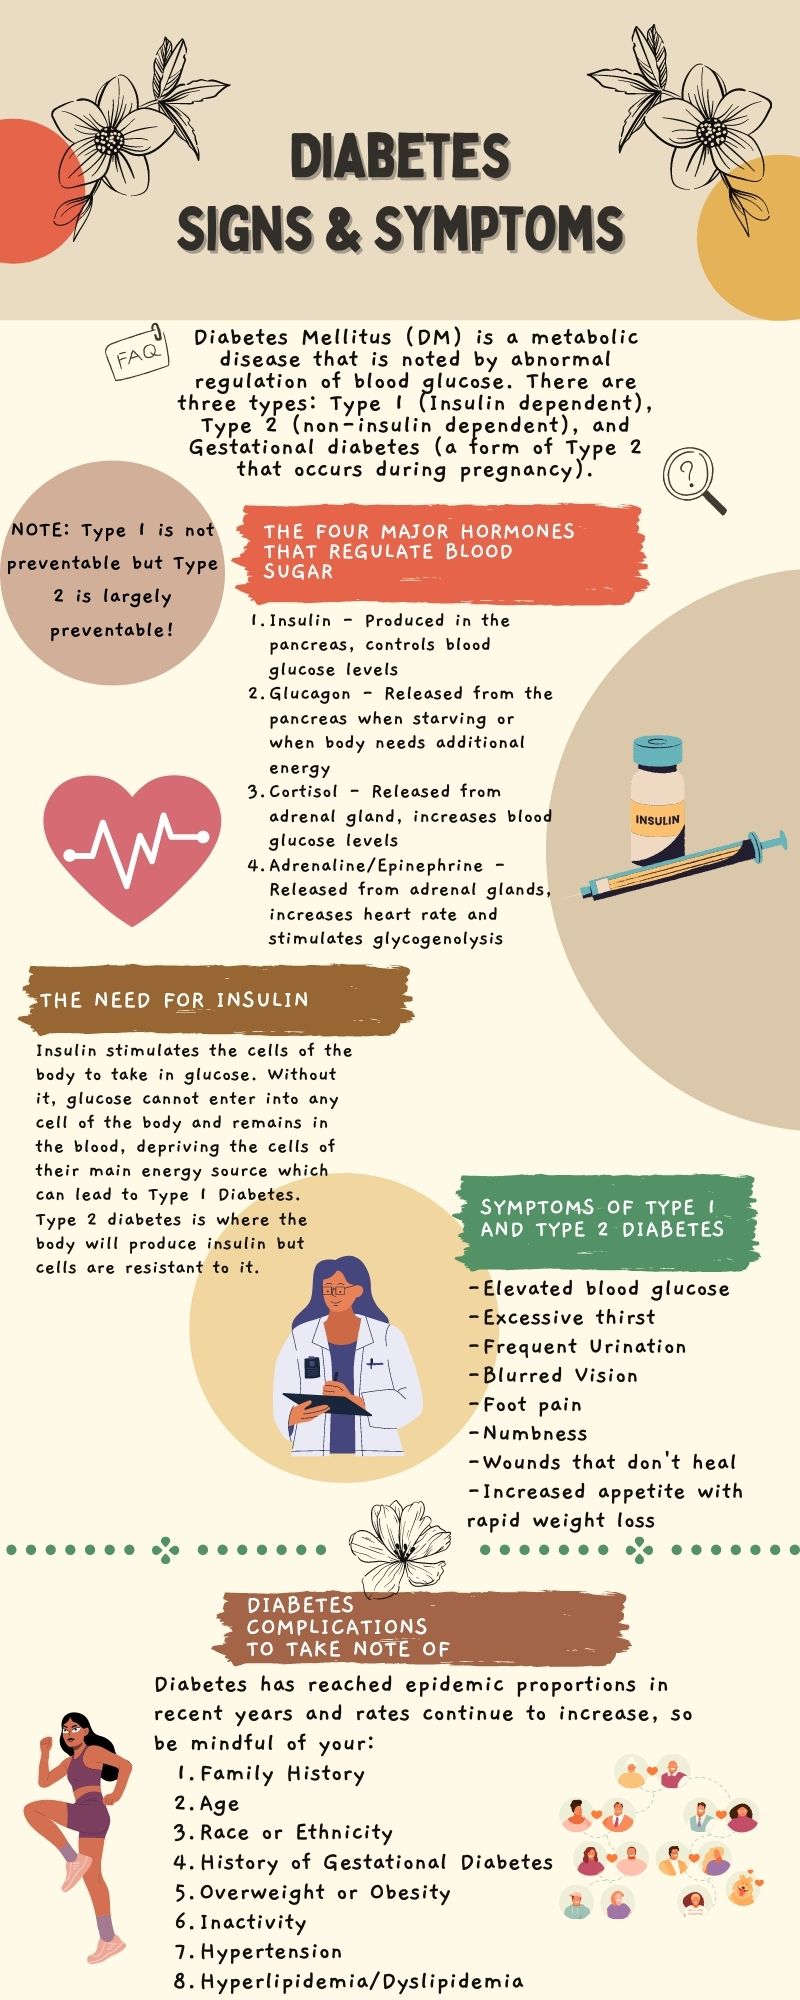 Infographic summarizing signs and symptoms for diabetes